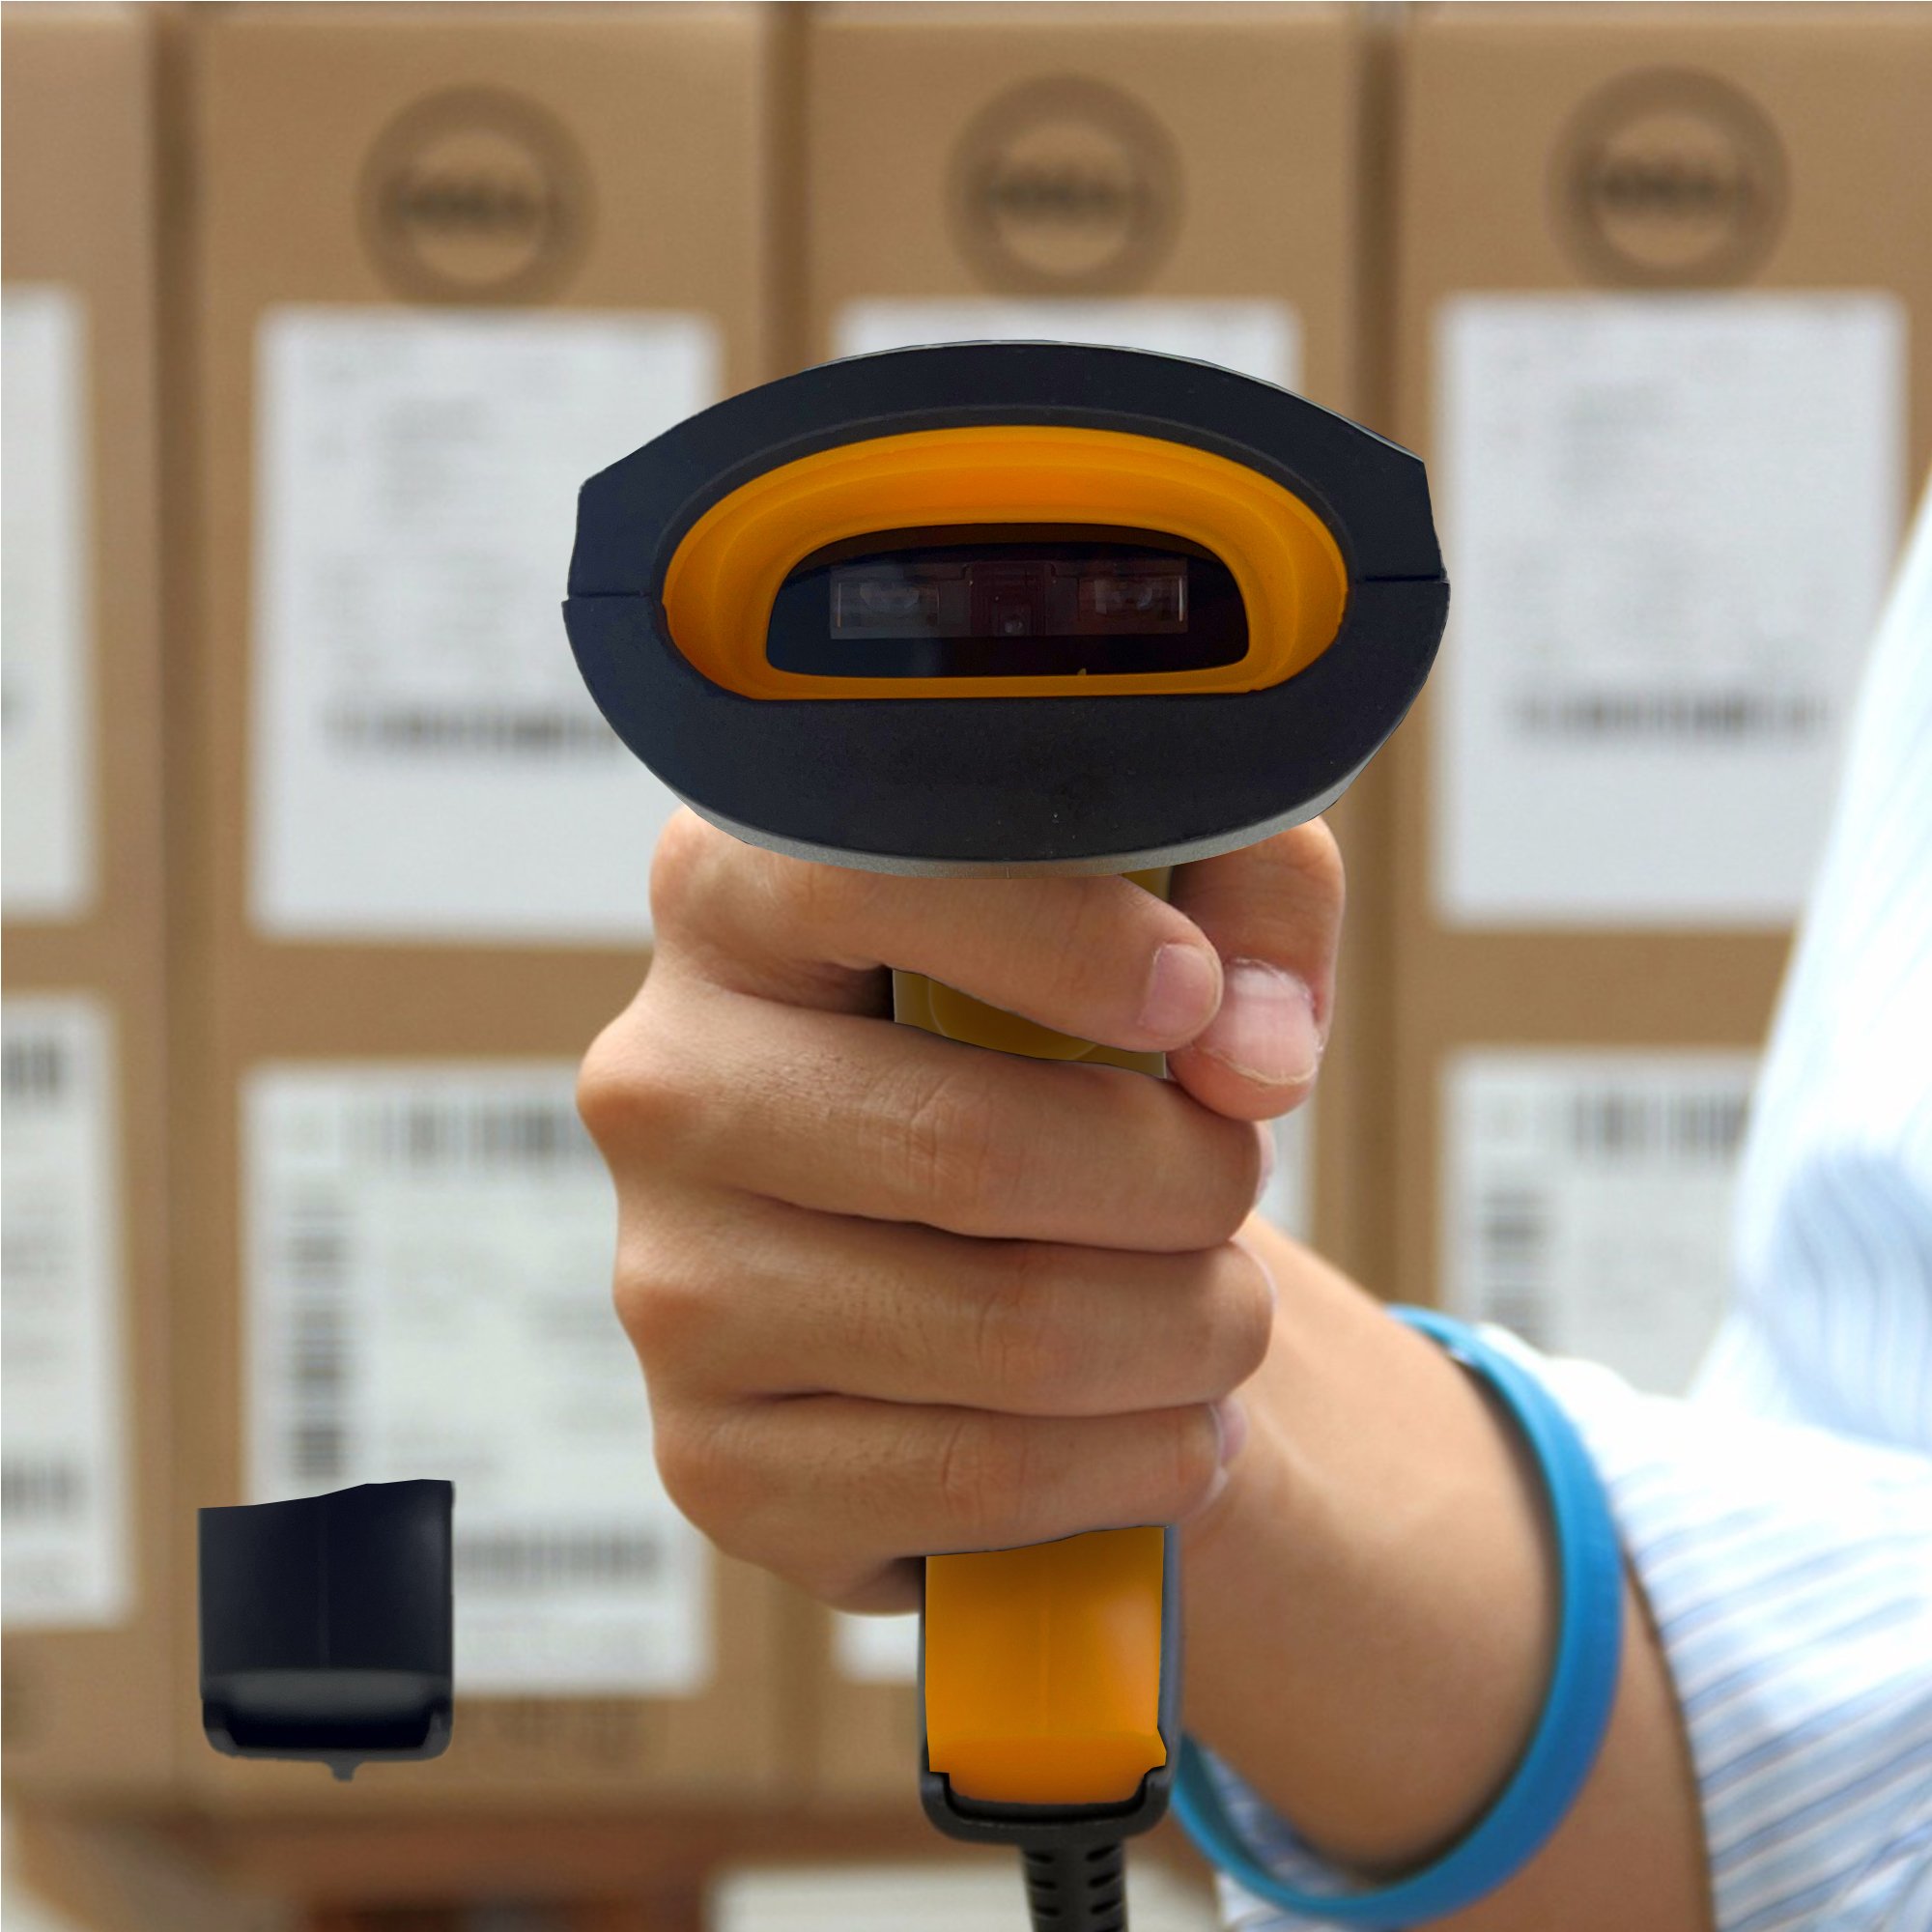 General Purpose Hands-Free Barcode Scanners